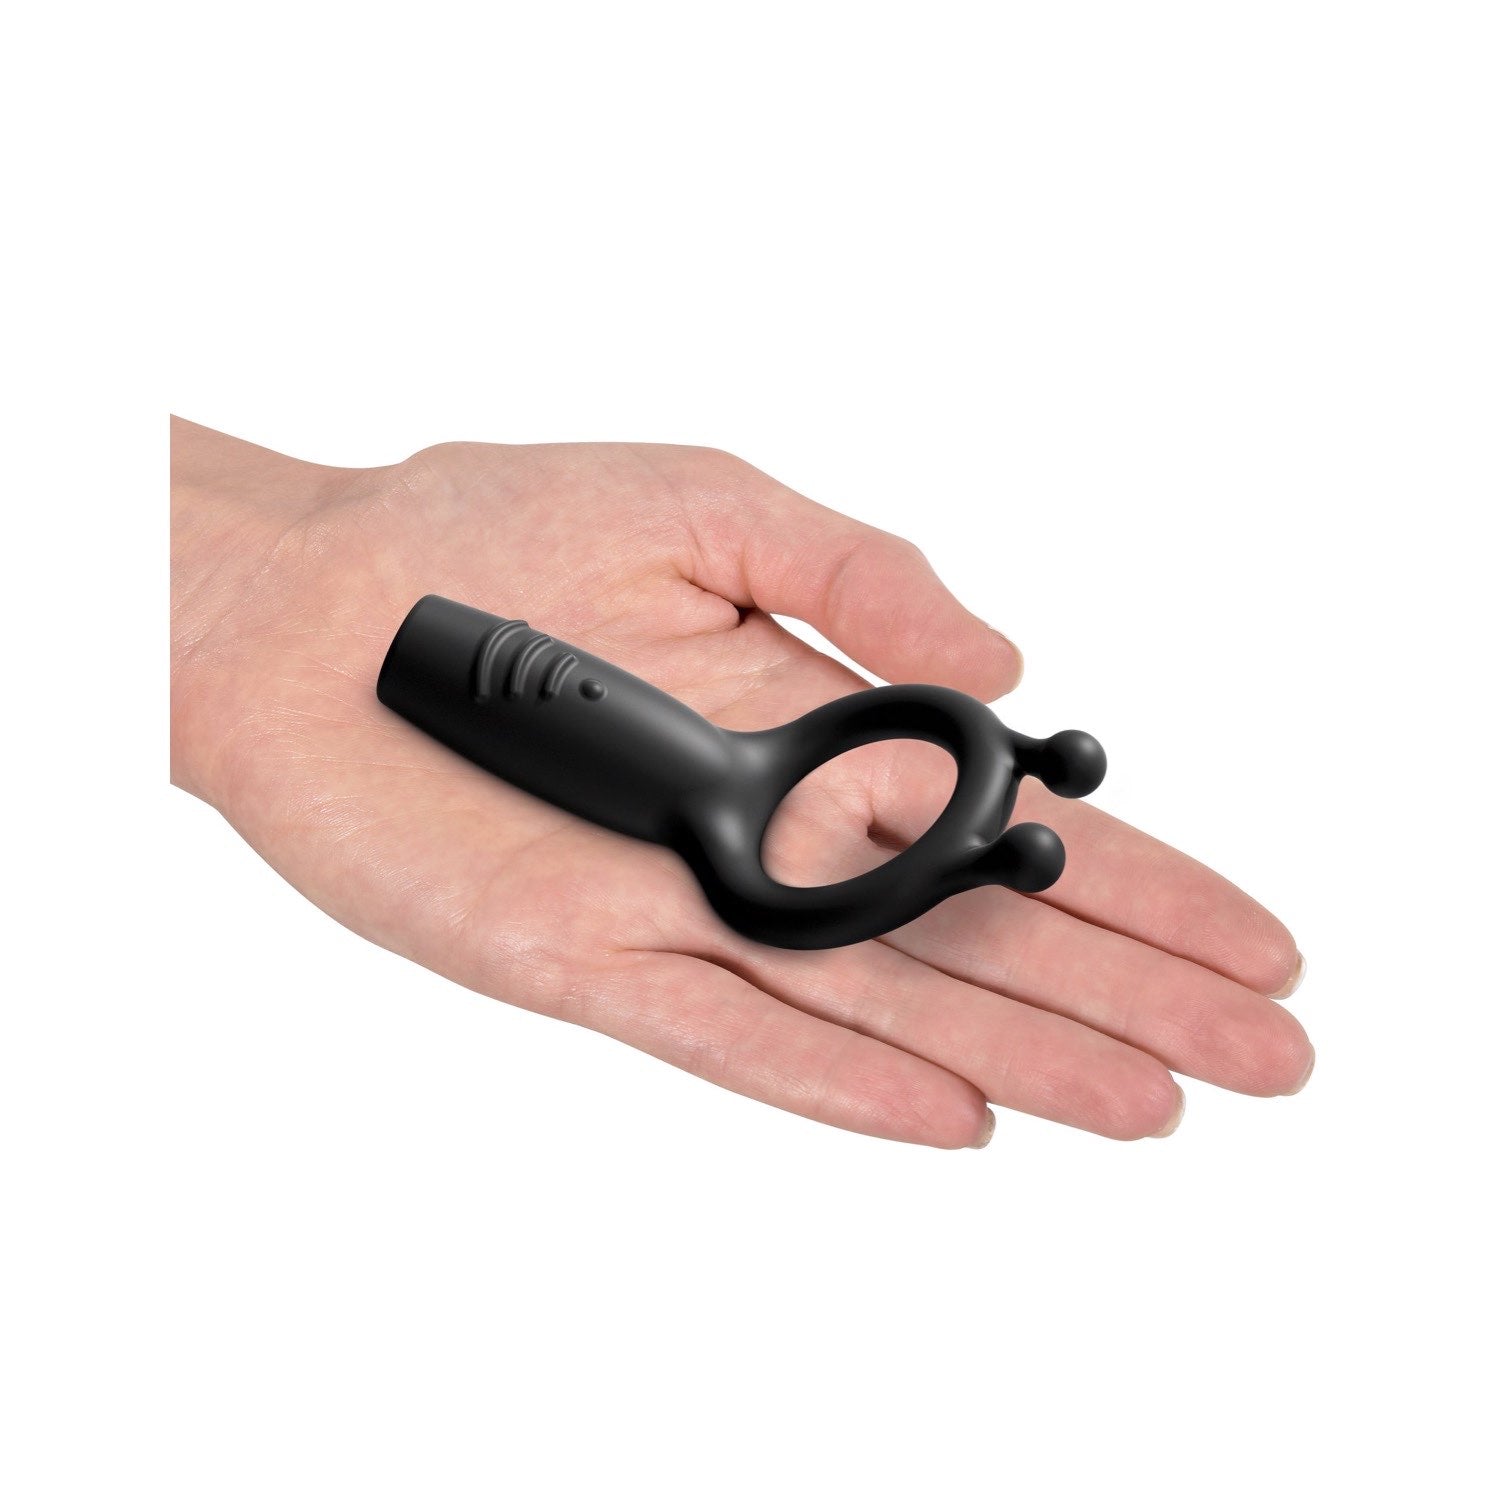 Sir Richards Vibrating Silicone Super C-Ring - Grey USB Rechargeable Vibrating Cock Ring by Pipedream